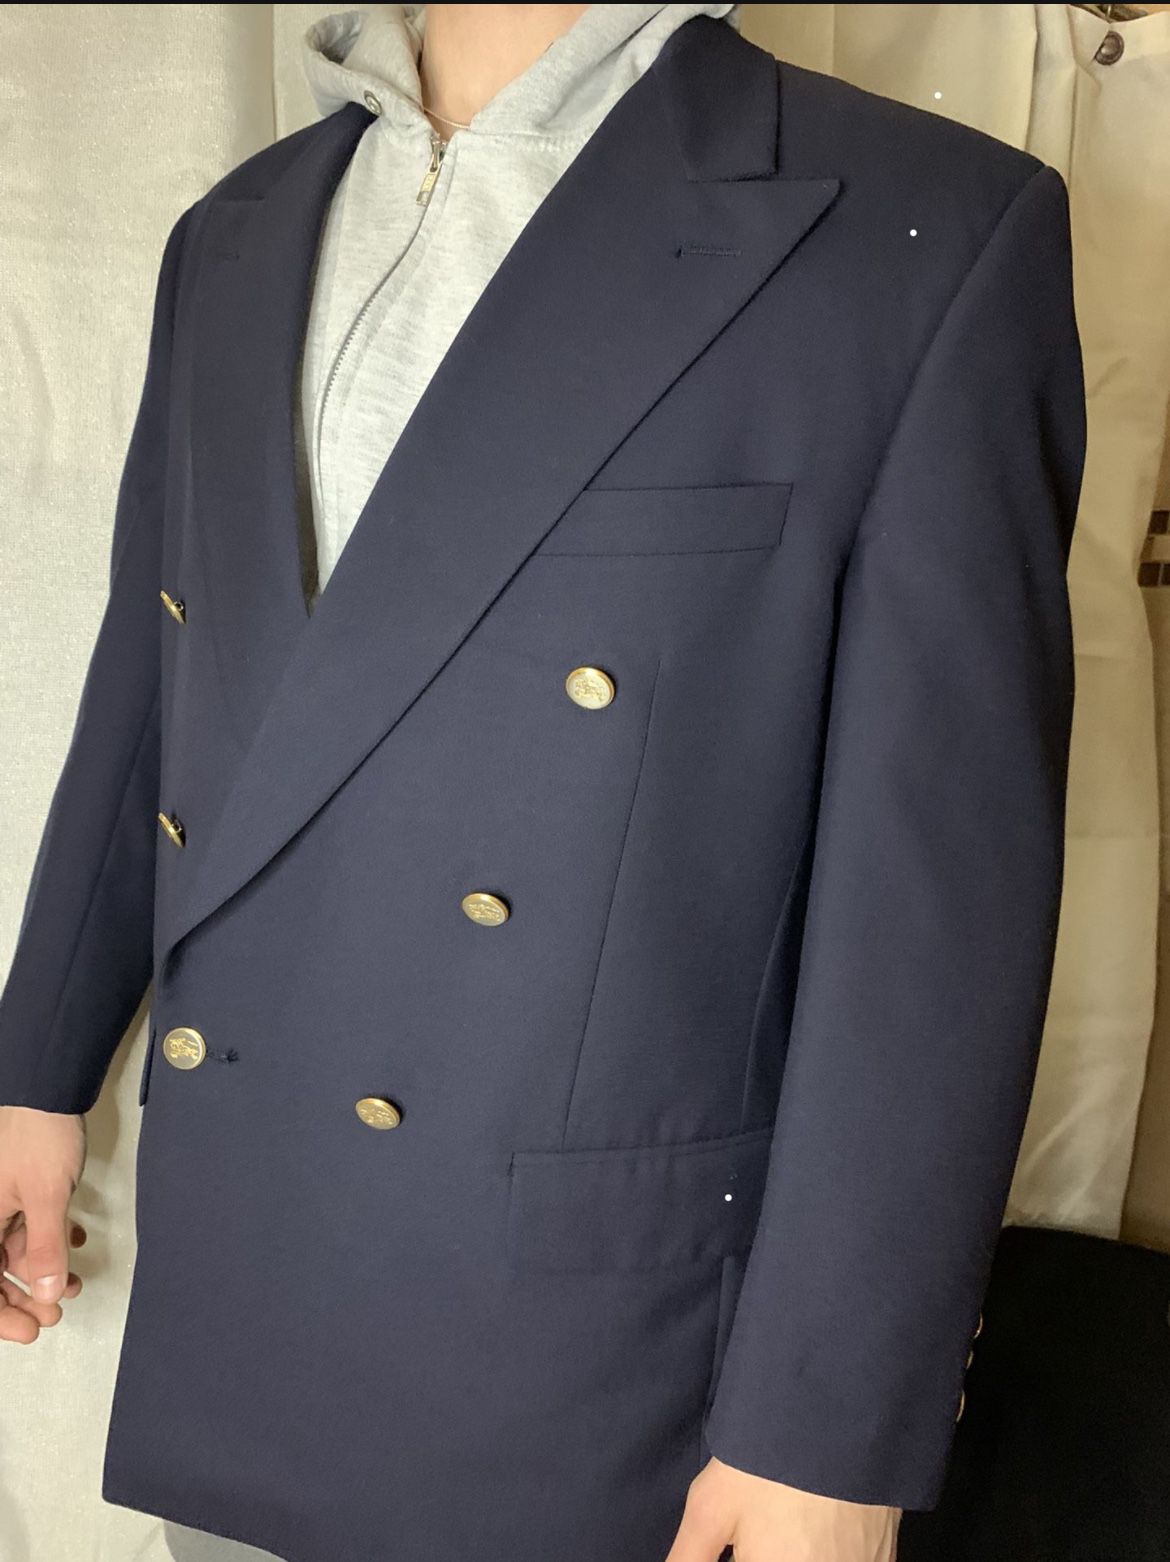 BURBERRY double breasted 46r blazer jacket WOOL navy blue SPORTSCOAT  vintage for Sale in The Colony, TX - OfferUp